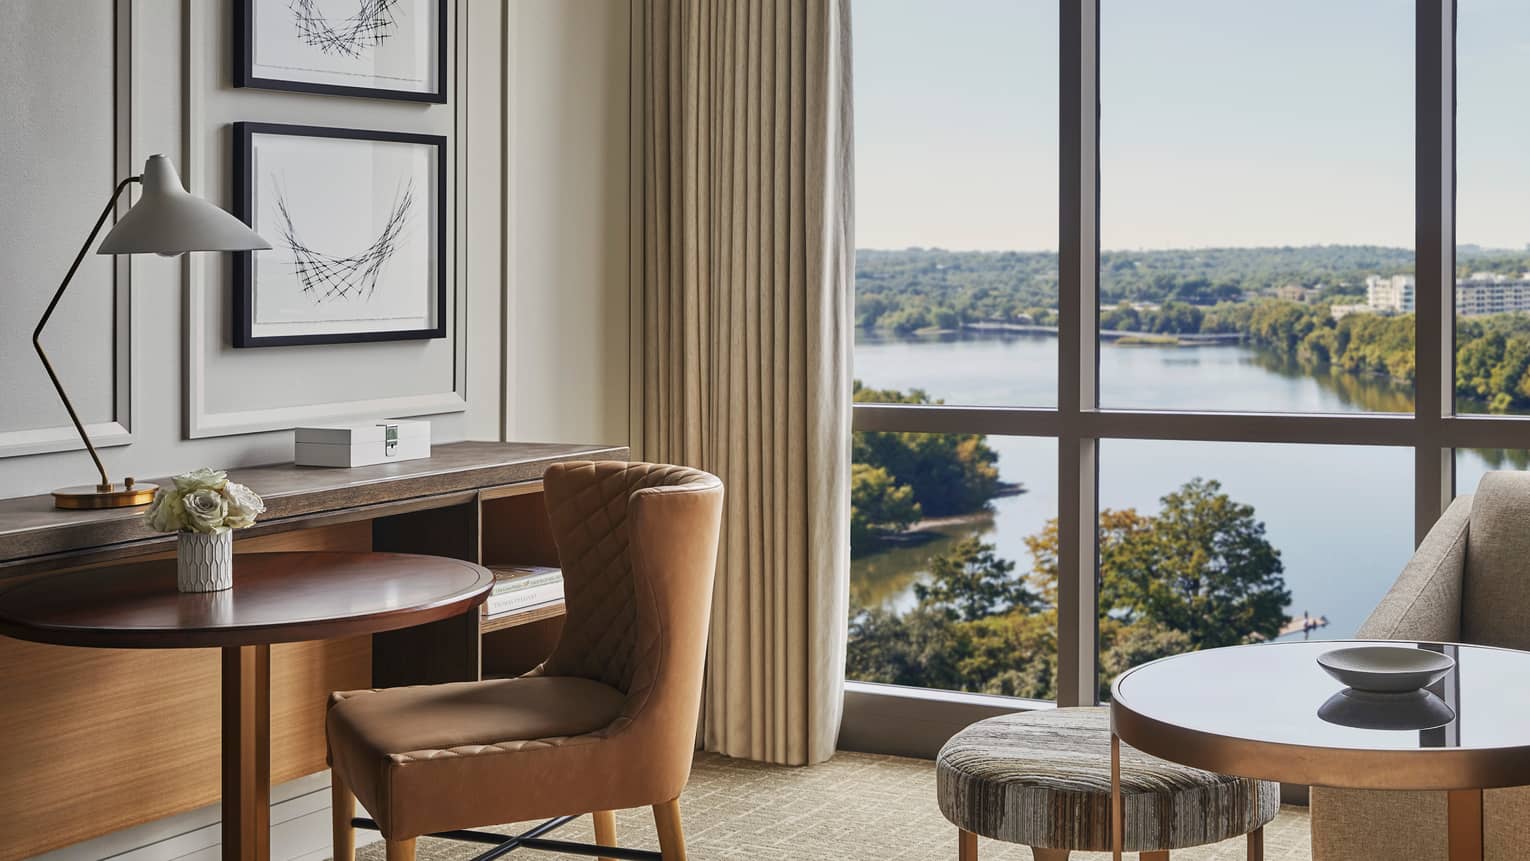 Leather chair by small hotel dining table, floor-to-ceiling windows, Lady Bird Lake views